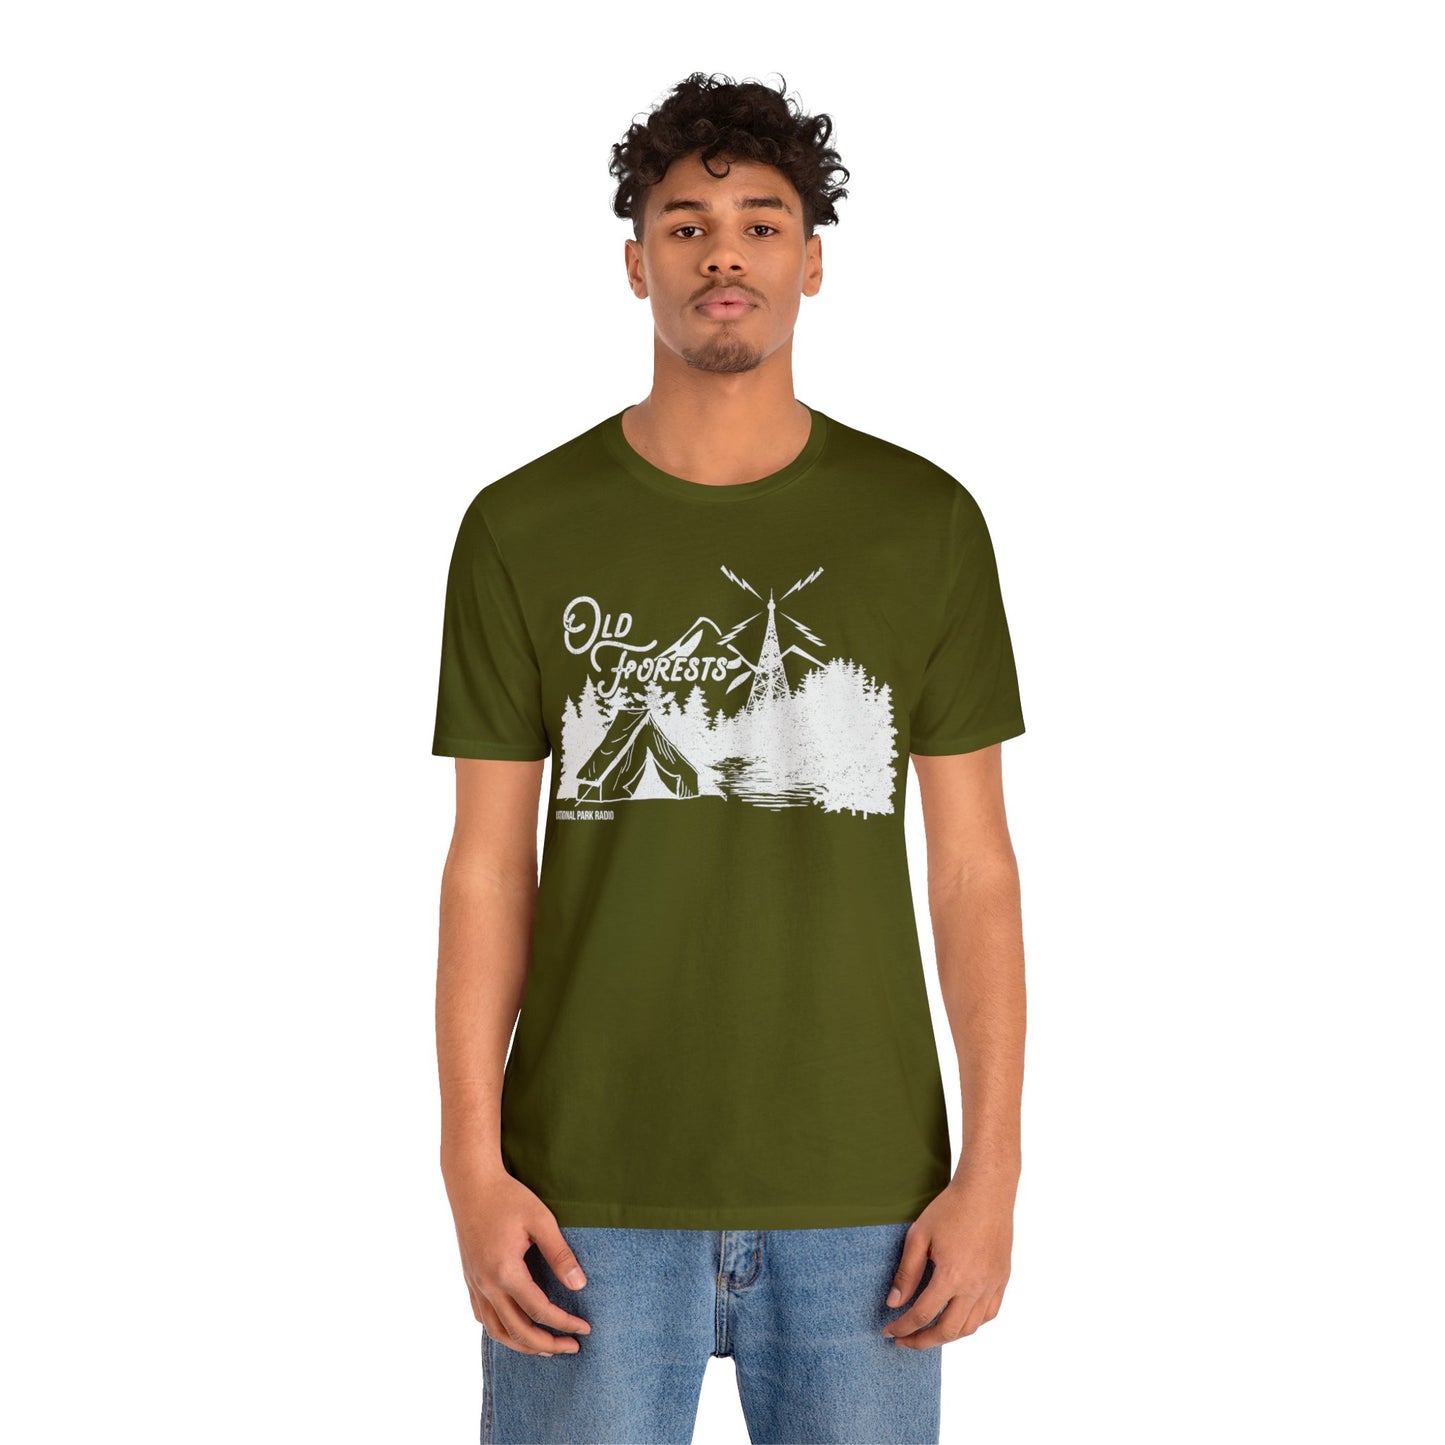 Old Forests Tee